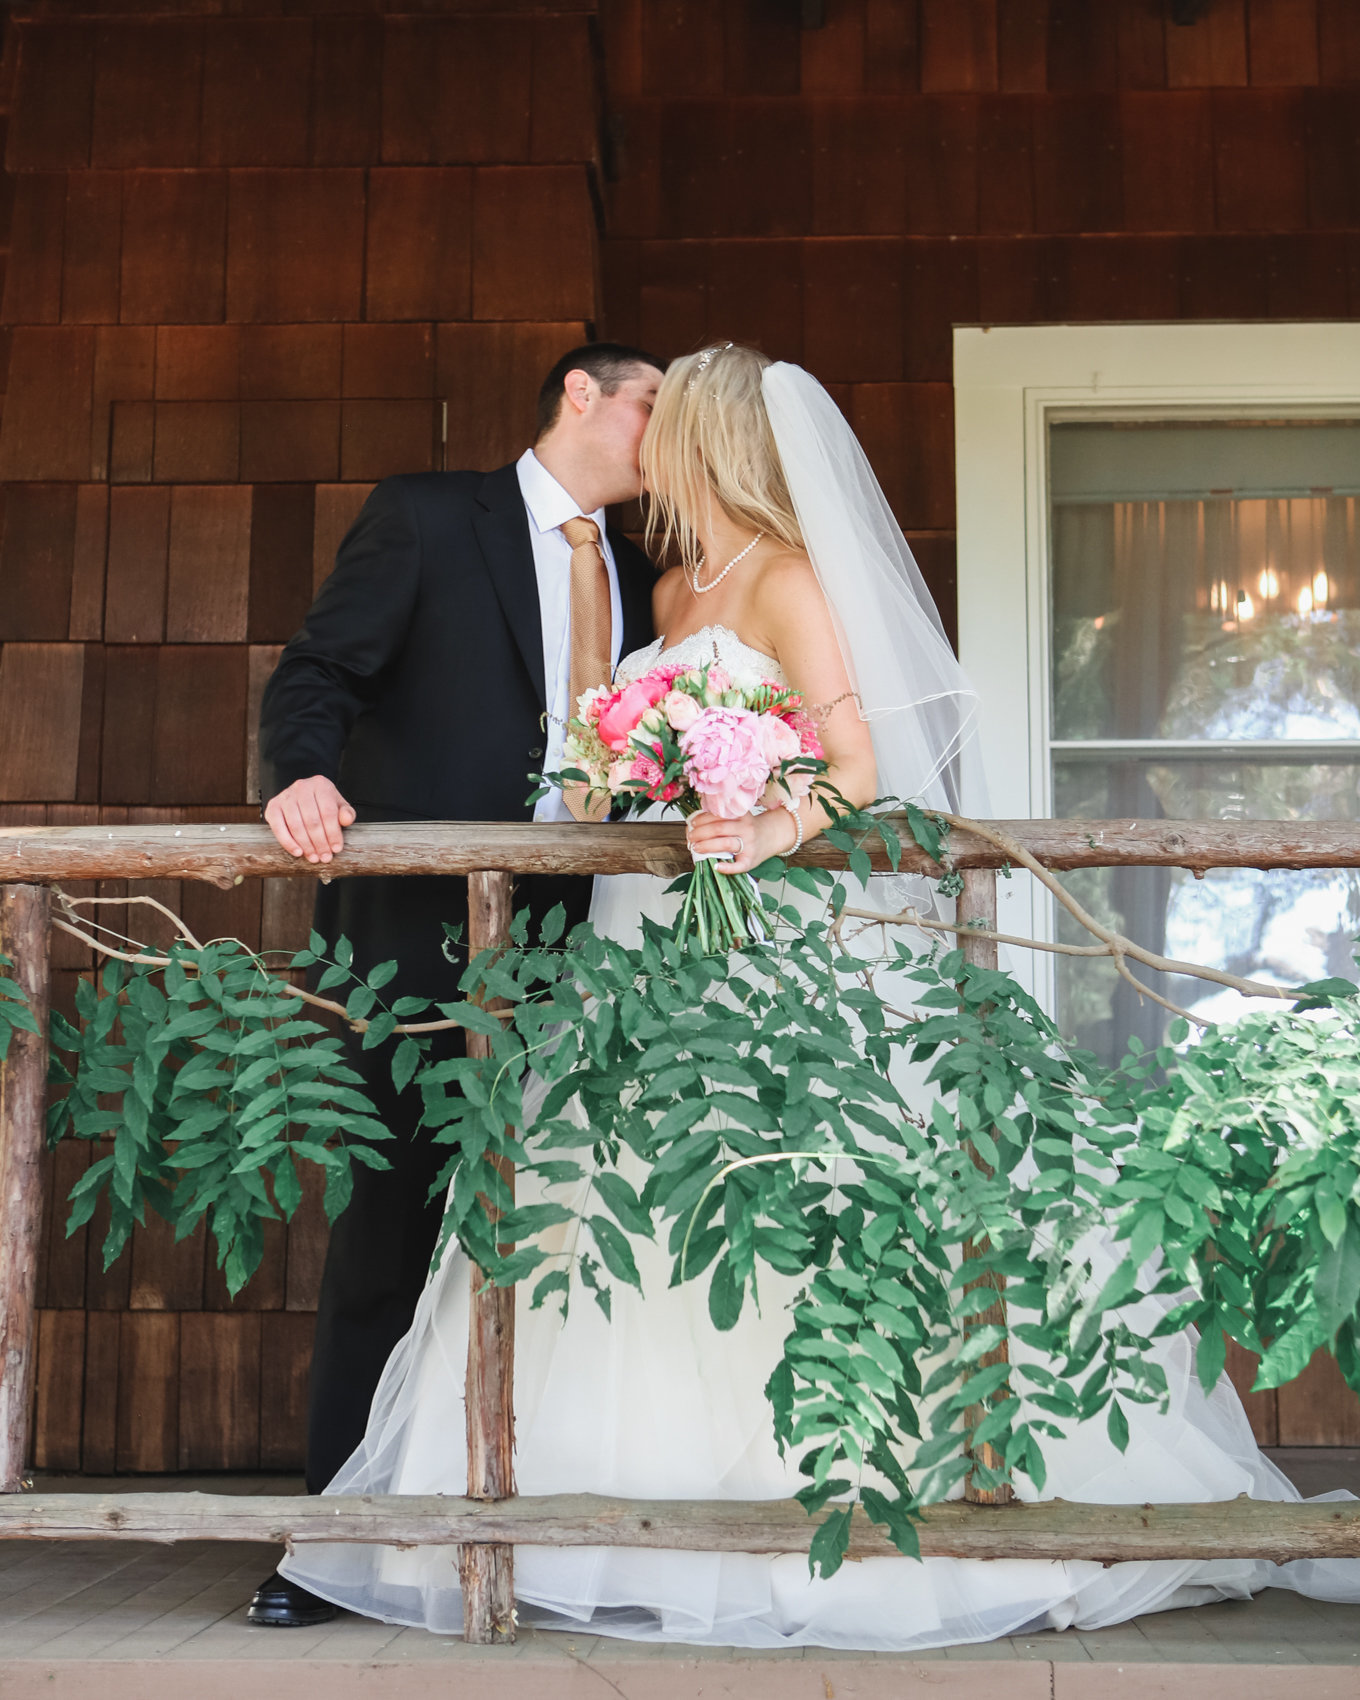 Bride and groom kiss in front of beautiful rustic wedding venue